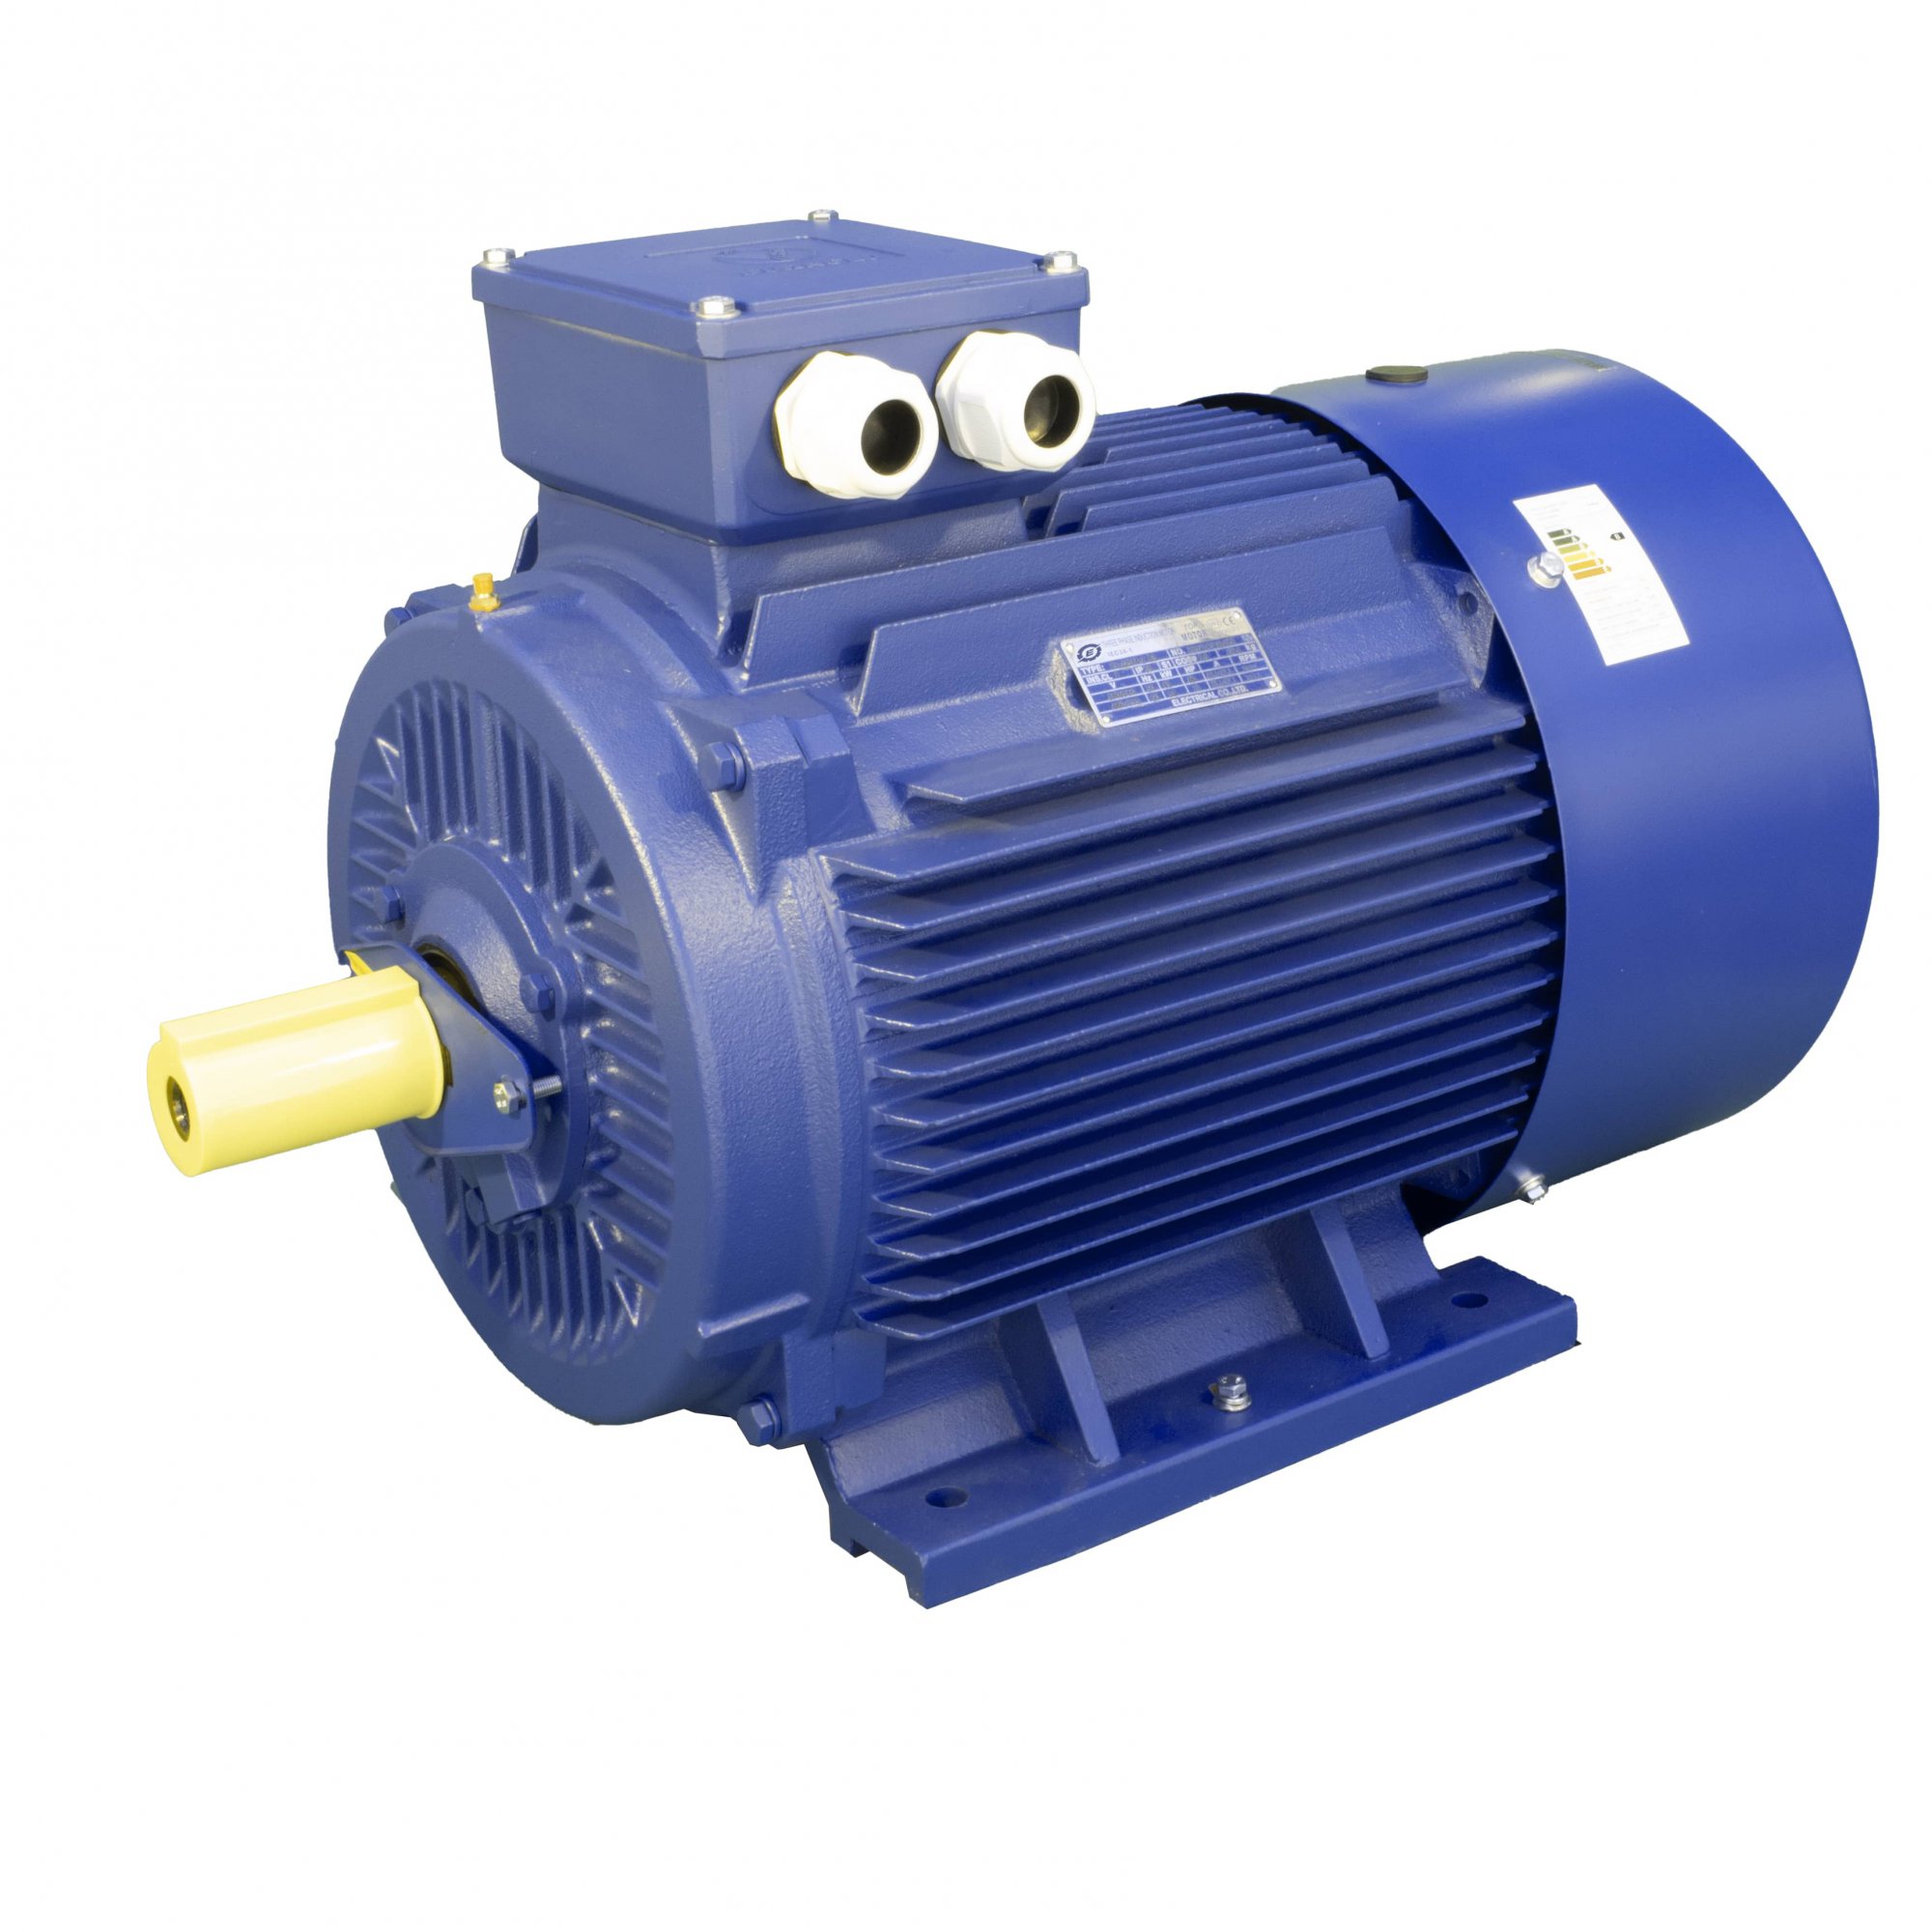 Cast iron shell three-phase electric motor